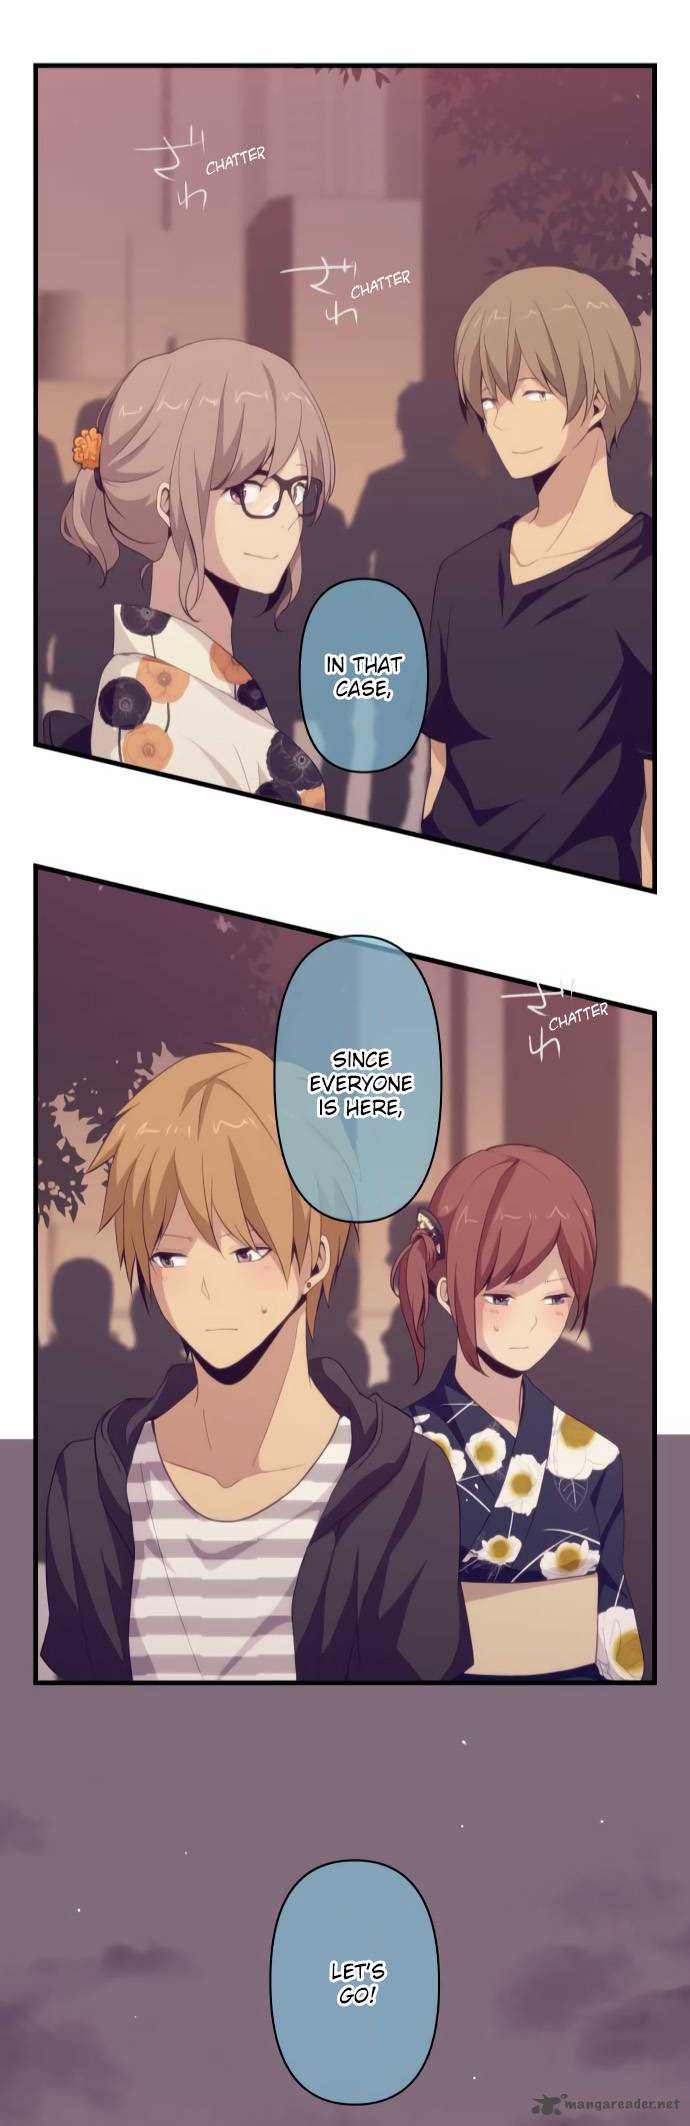 Relife 101 23